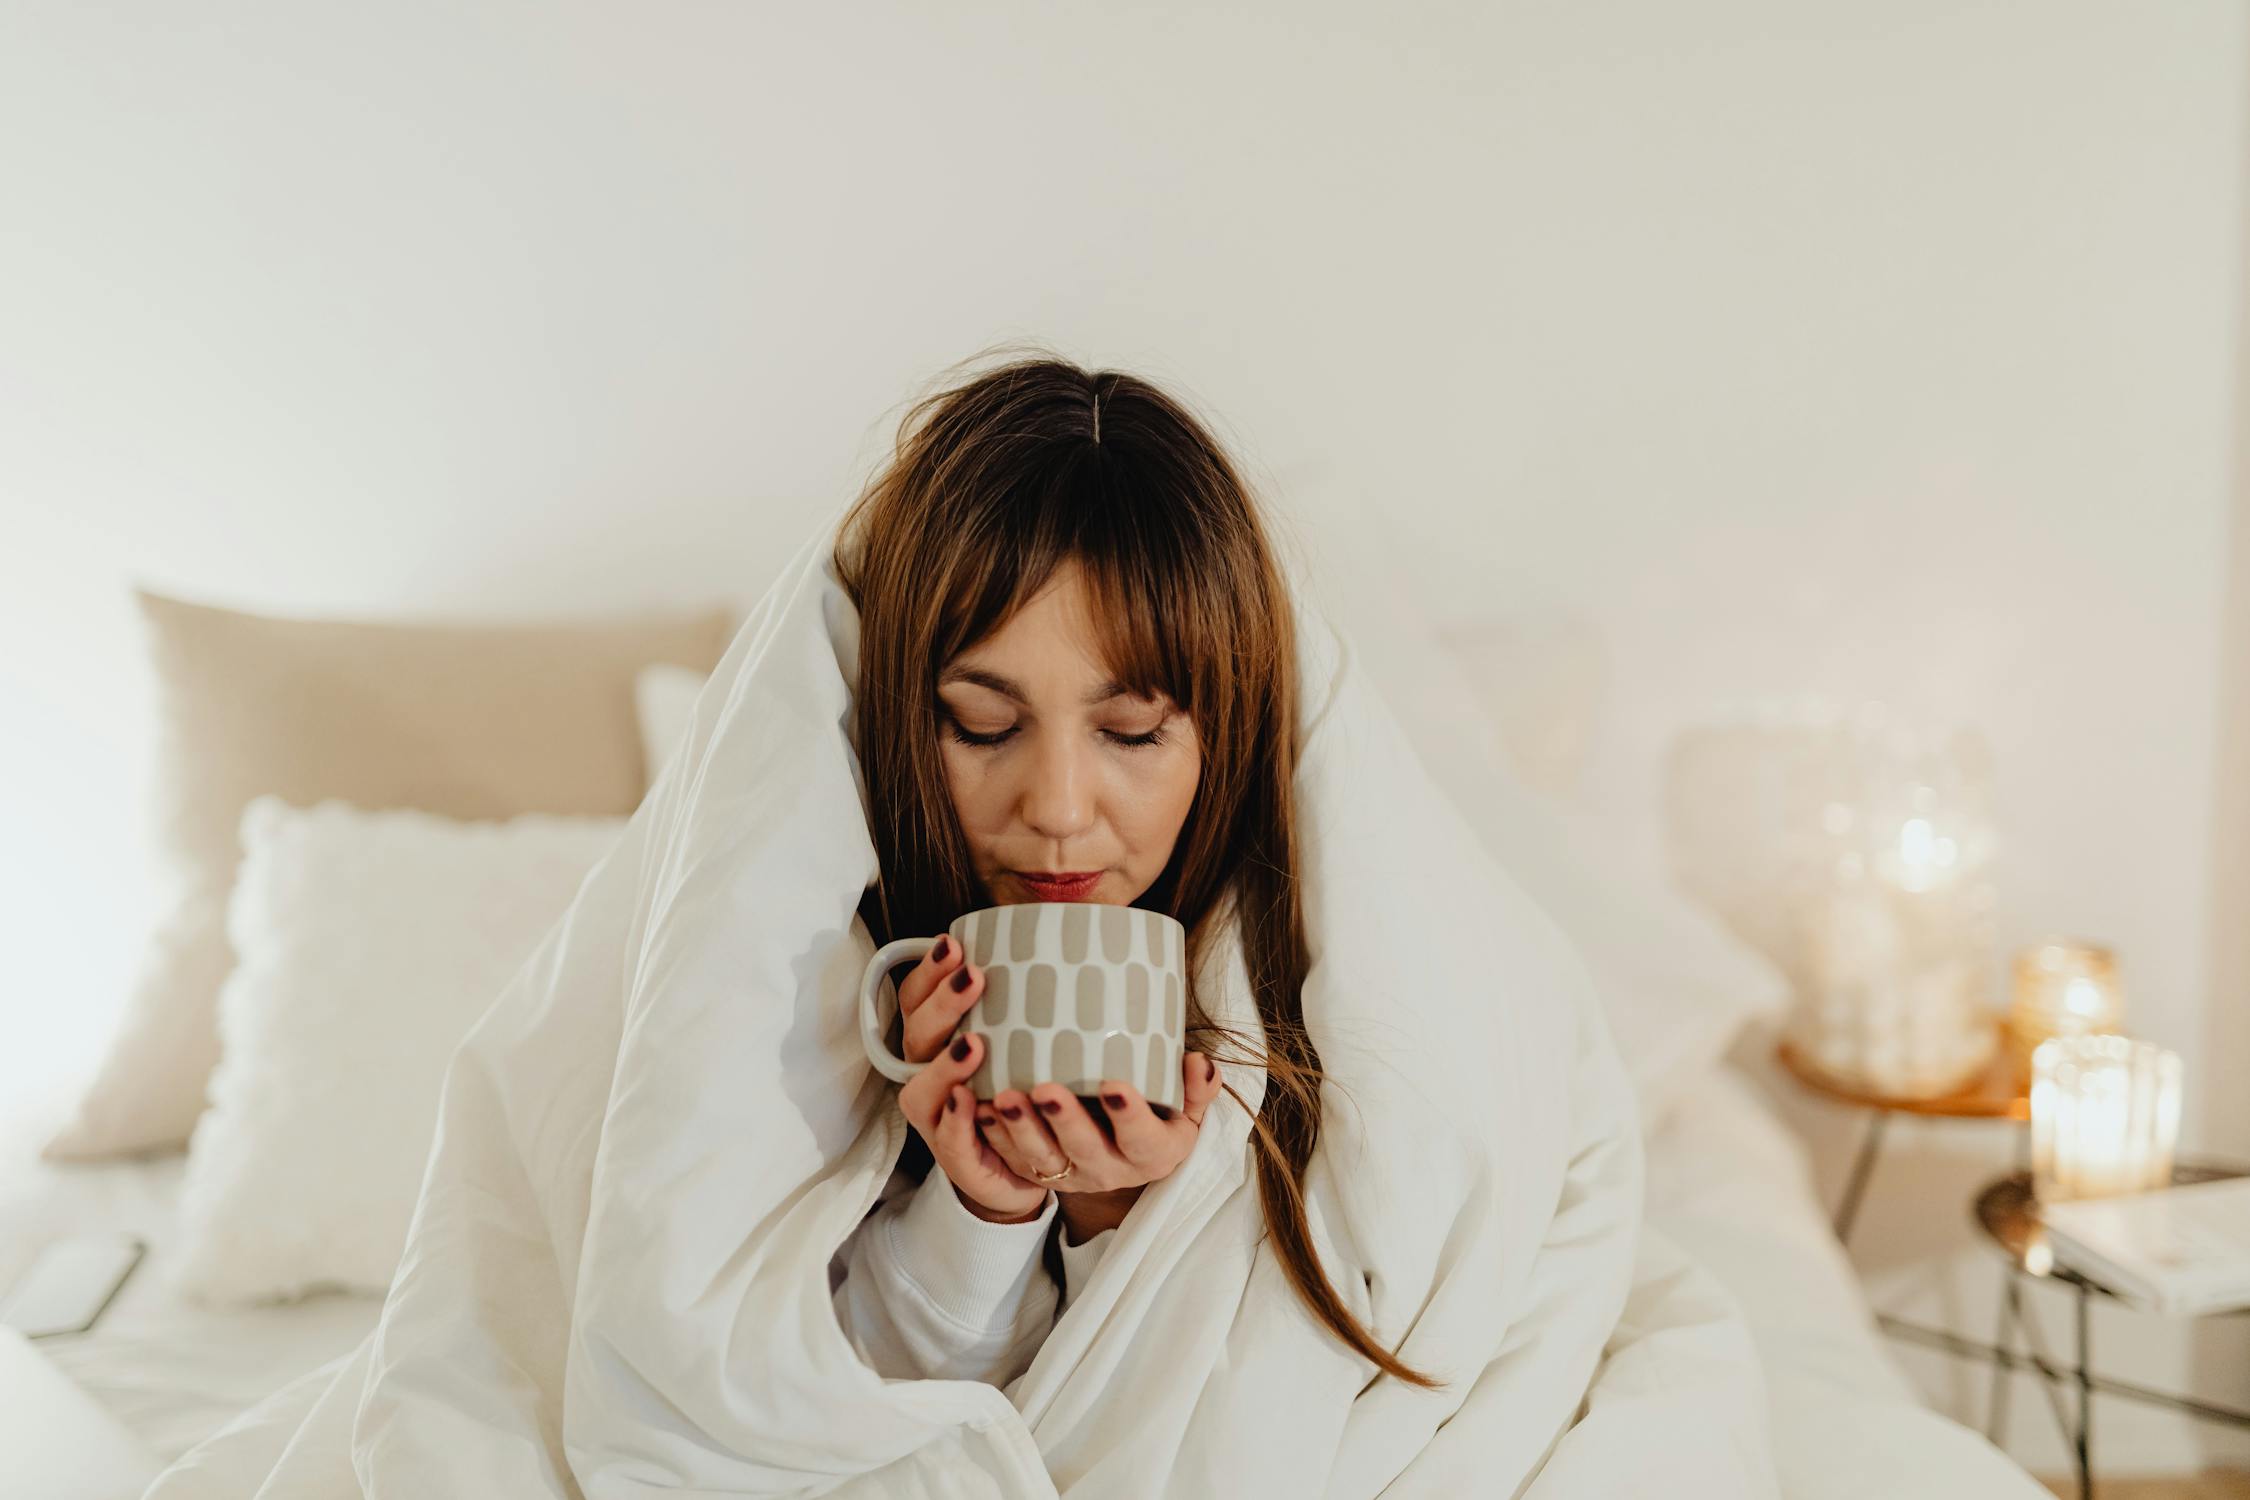 Image of woman wrapped in white blanket holding a ceramic mug